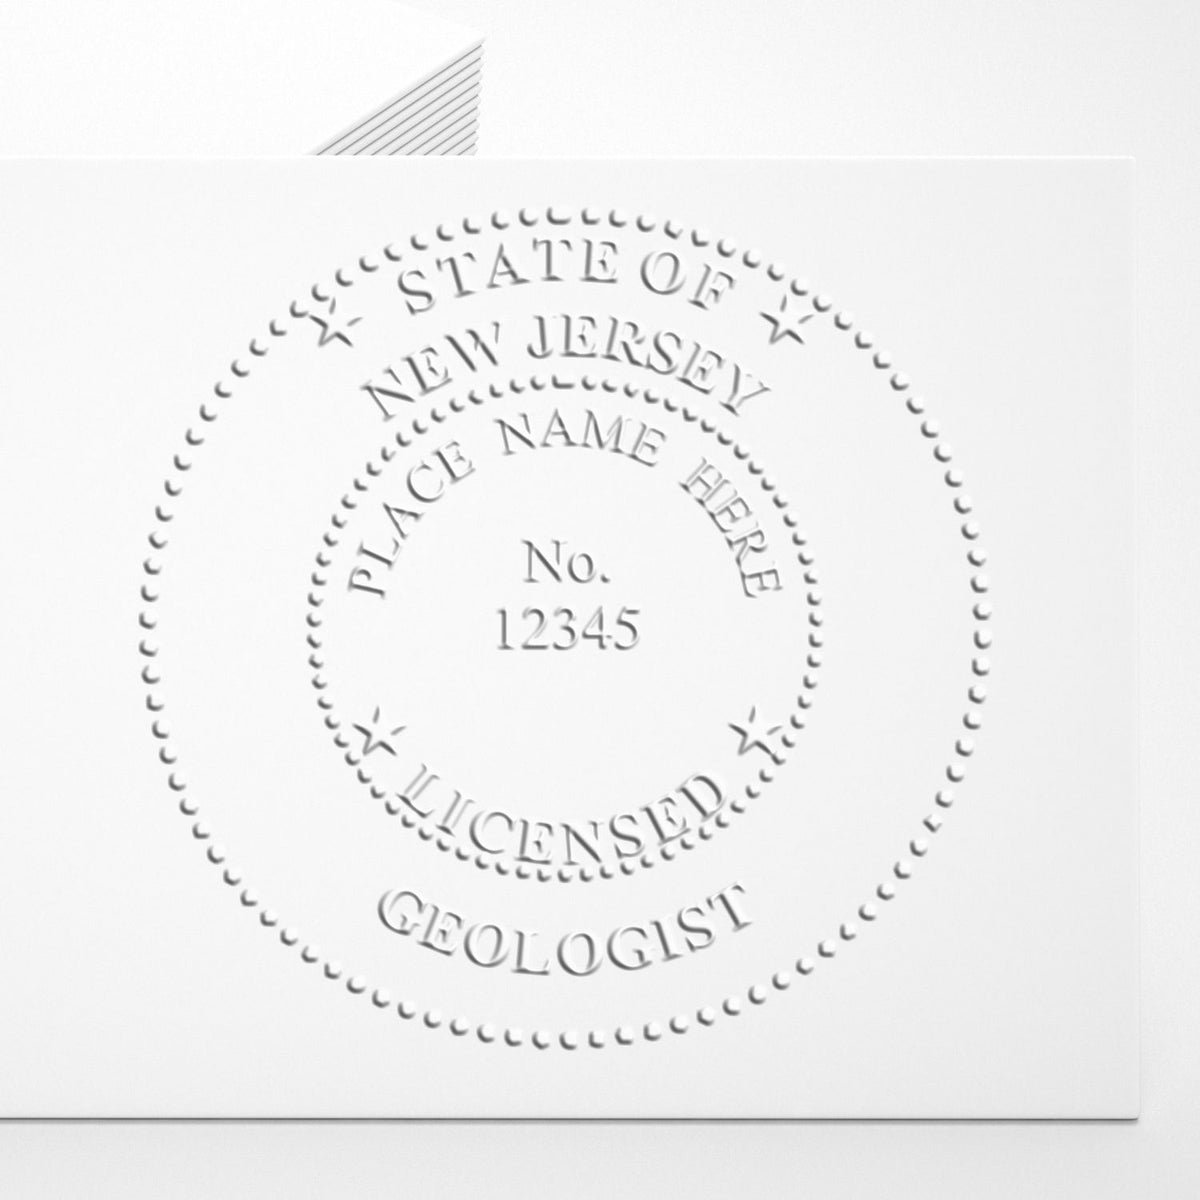 An in use photo of the Long Reach New Jersey Geology Seal showing a sample imprint on a cardstock